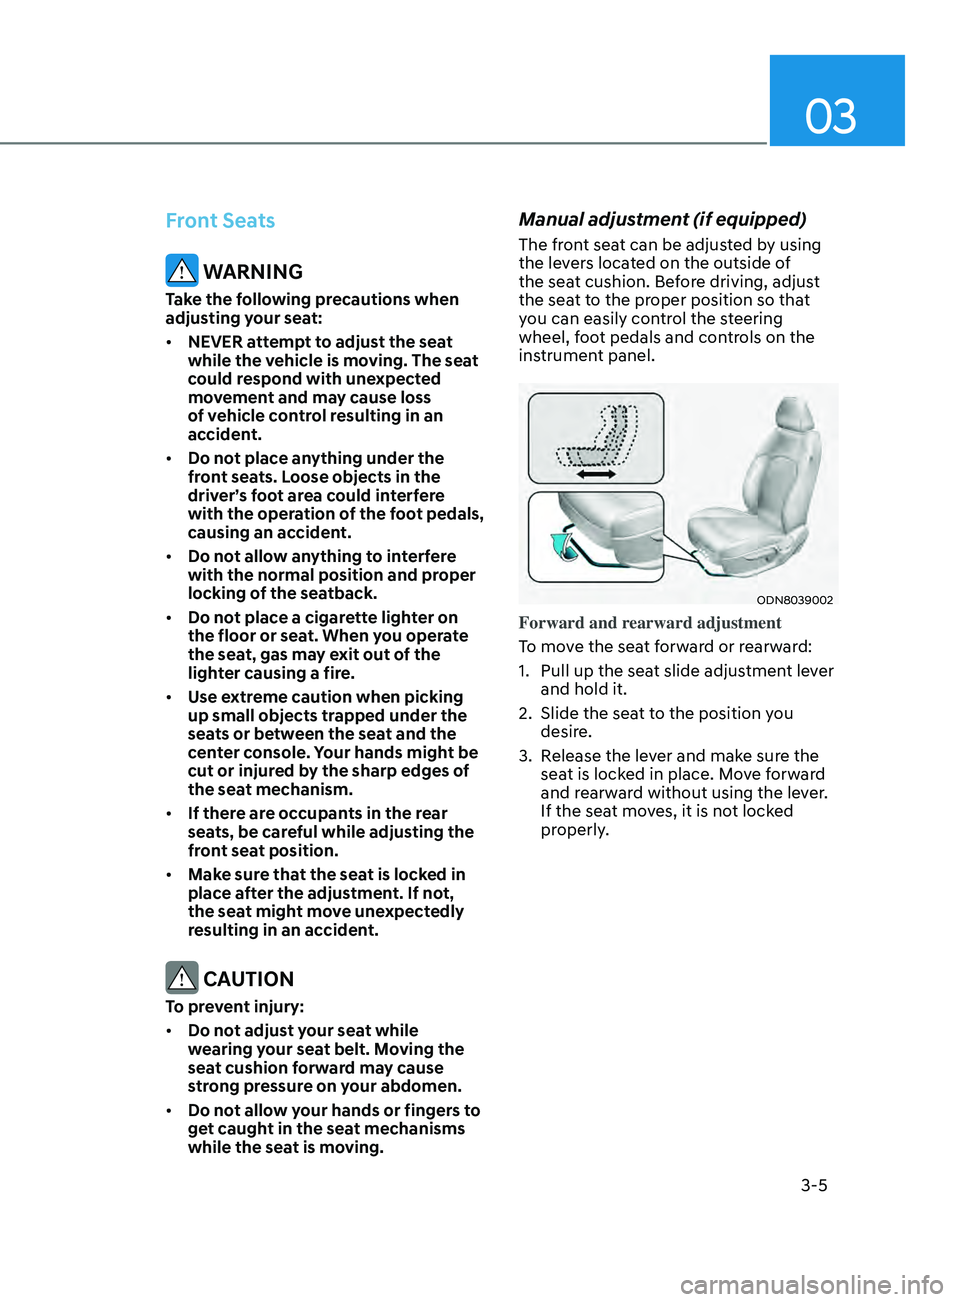 HYUNDAI SONATA LIMITED 2021  Owners Manual 03
3-5
Front Seats
 WARNING
Take the following precautions when 
adjusting your seat:
•	NEVER attempt to adjust the seat 
while the vehicle is moving. The seat 
could respond with unexpected 
moveme